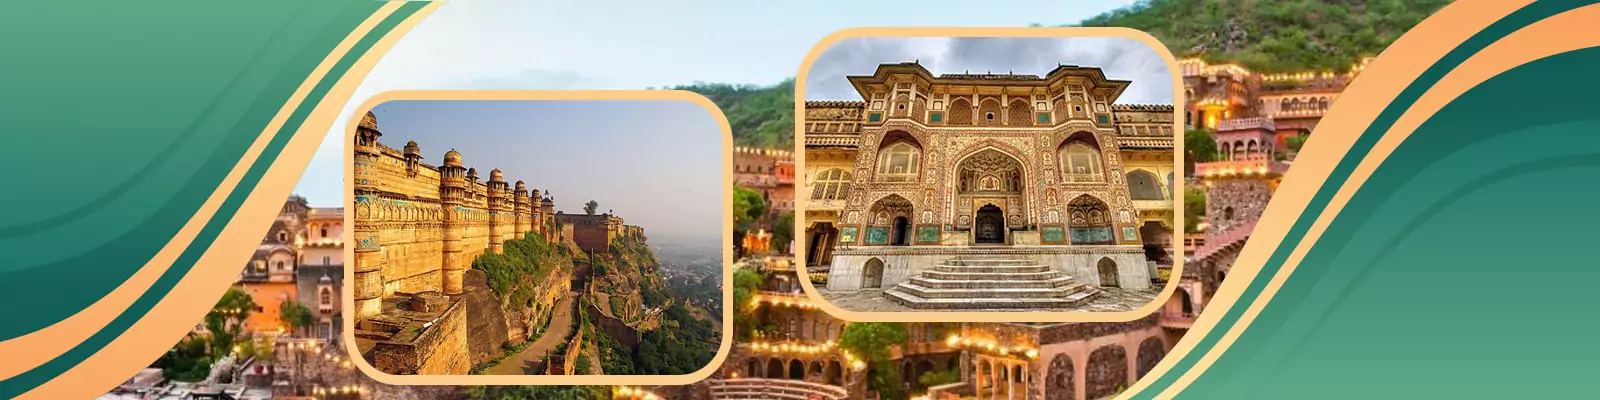 rajasthan forts and palaces tour